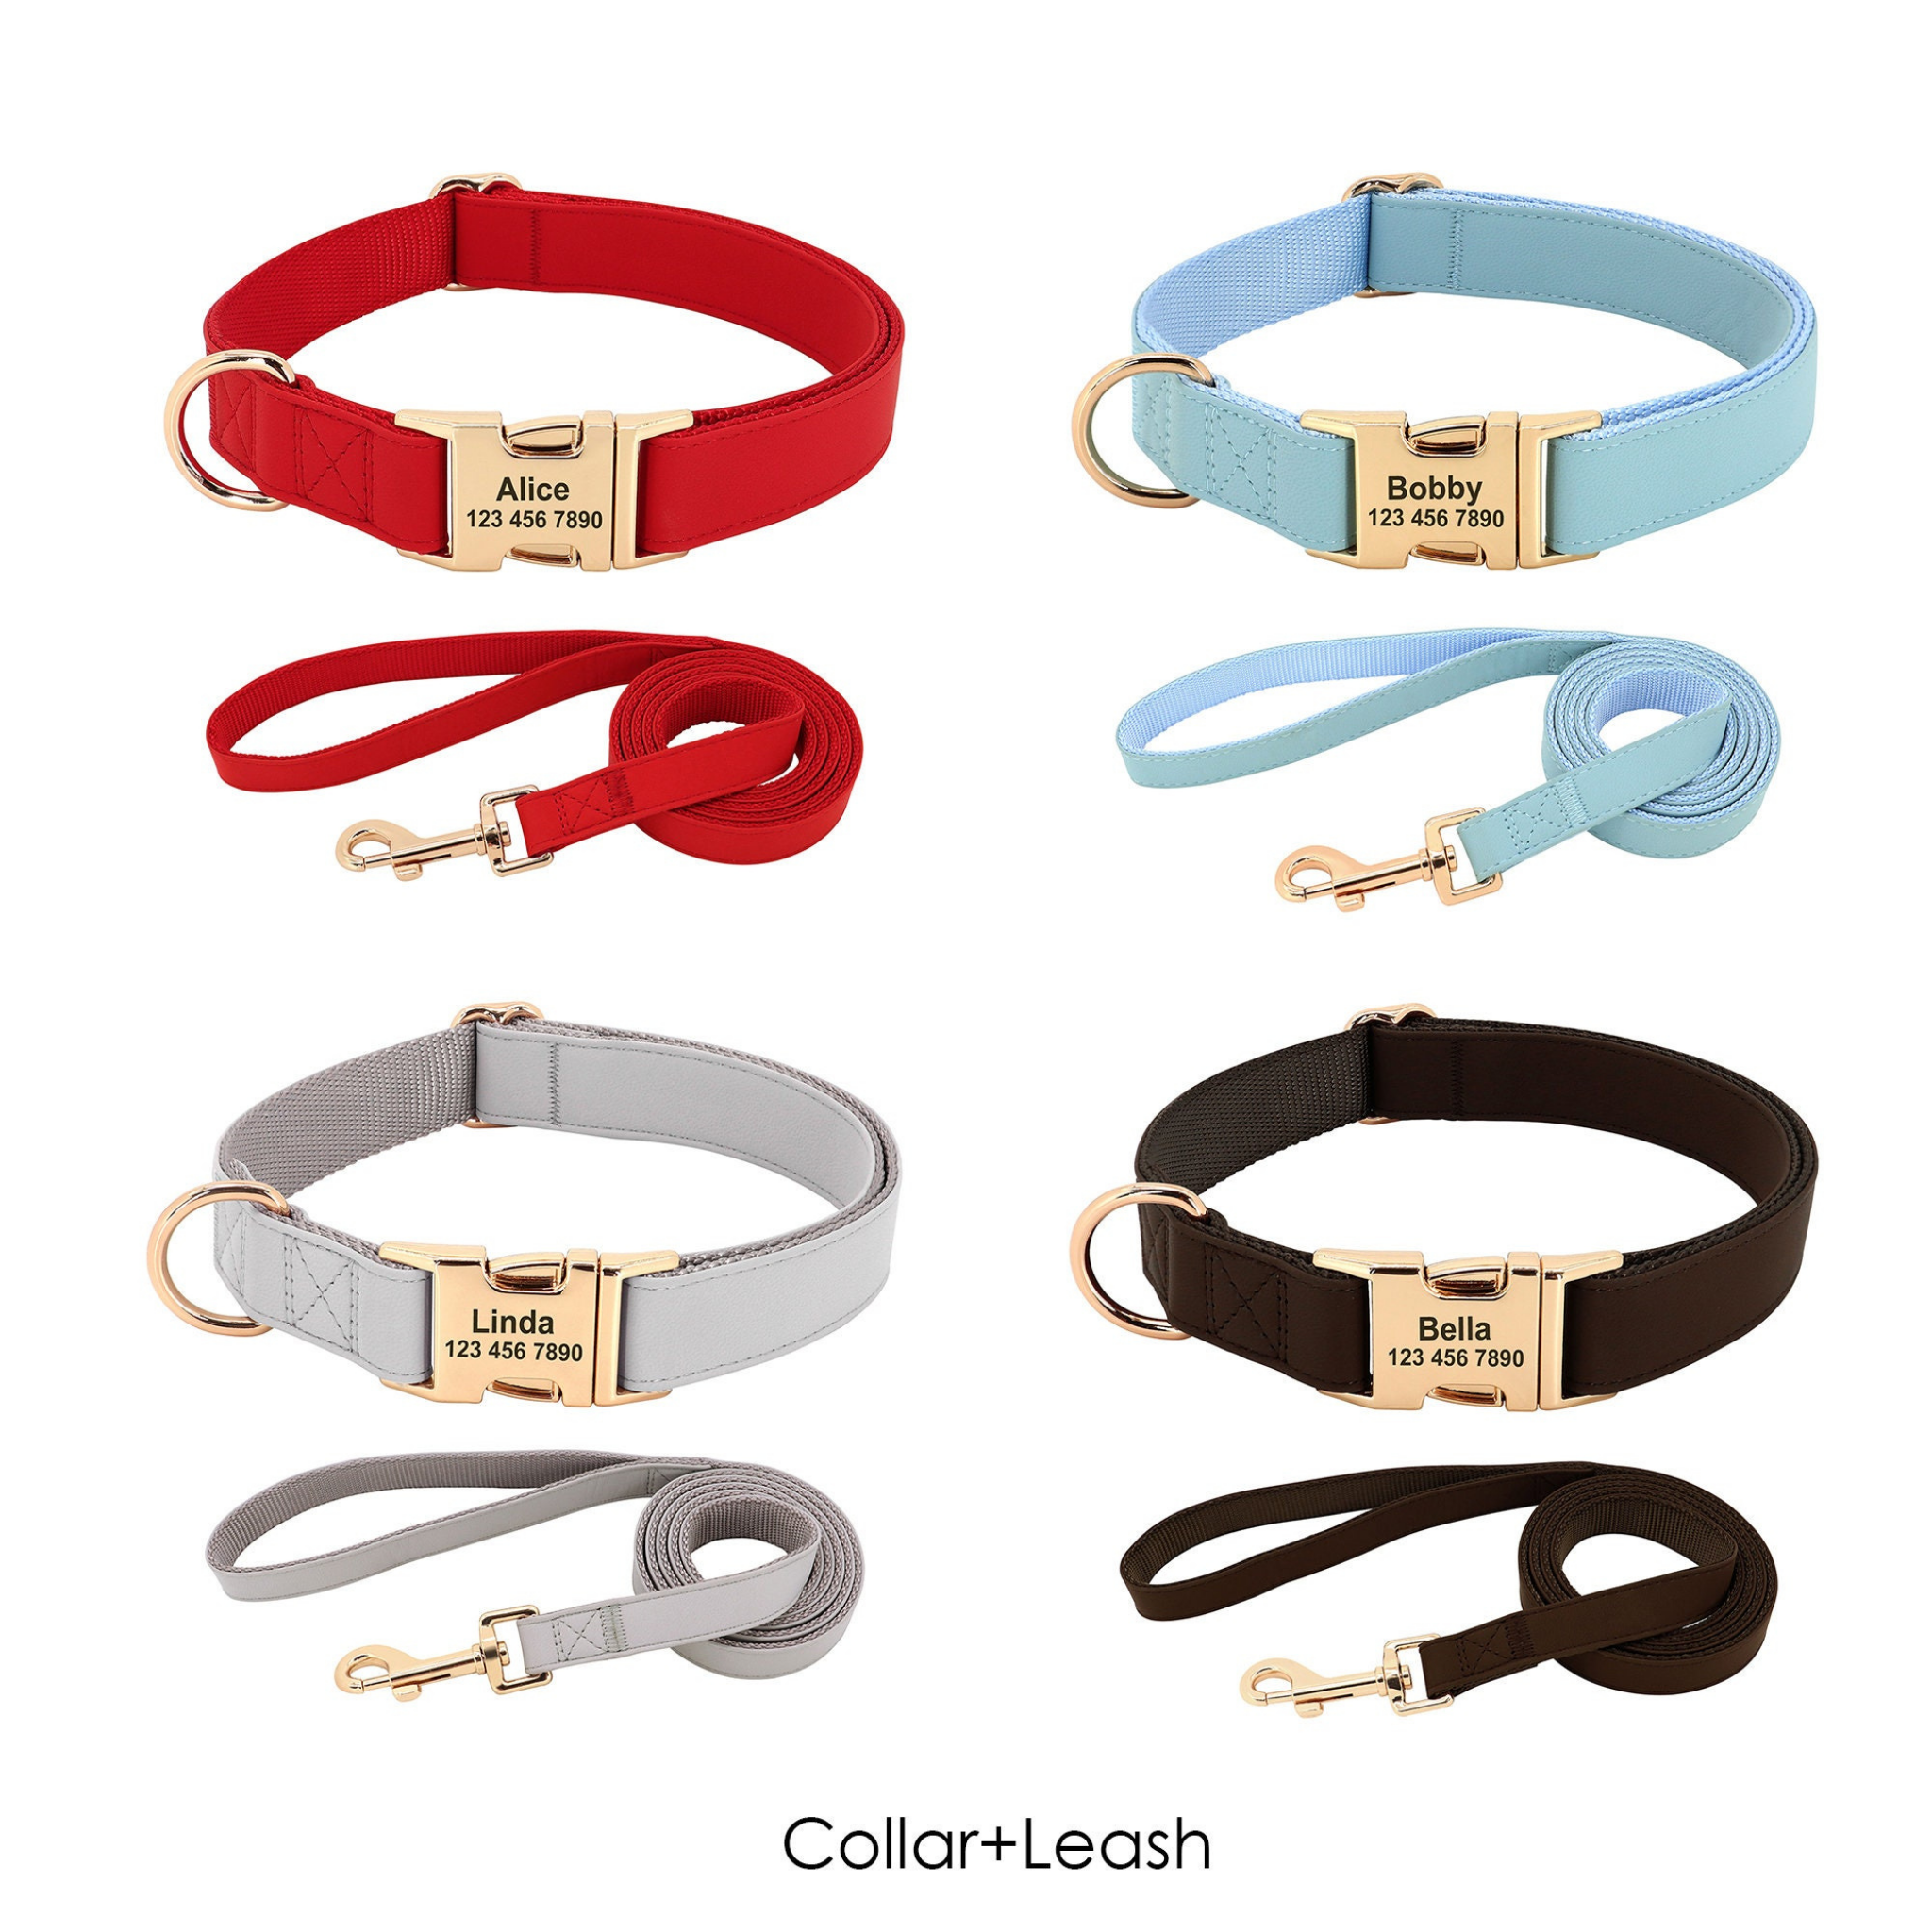 Personalized Engraved Handmade PU Leather Dog Collar, Leash, Harness featuring a Nylon Inner Webbing and Metal Buckle